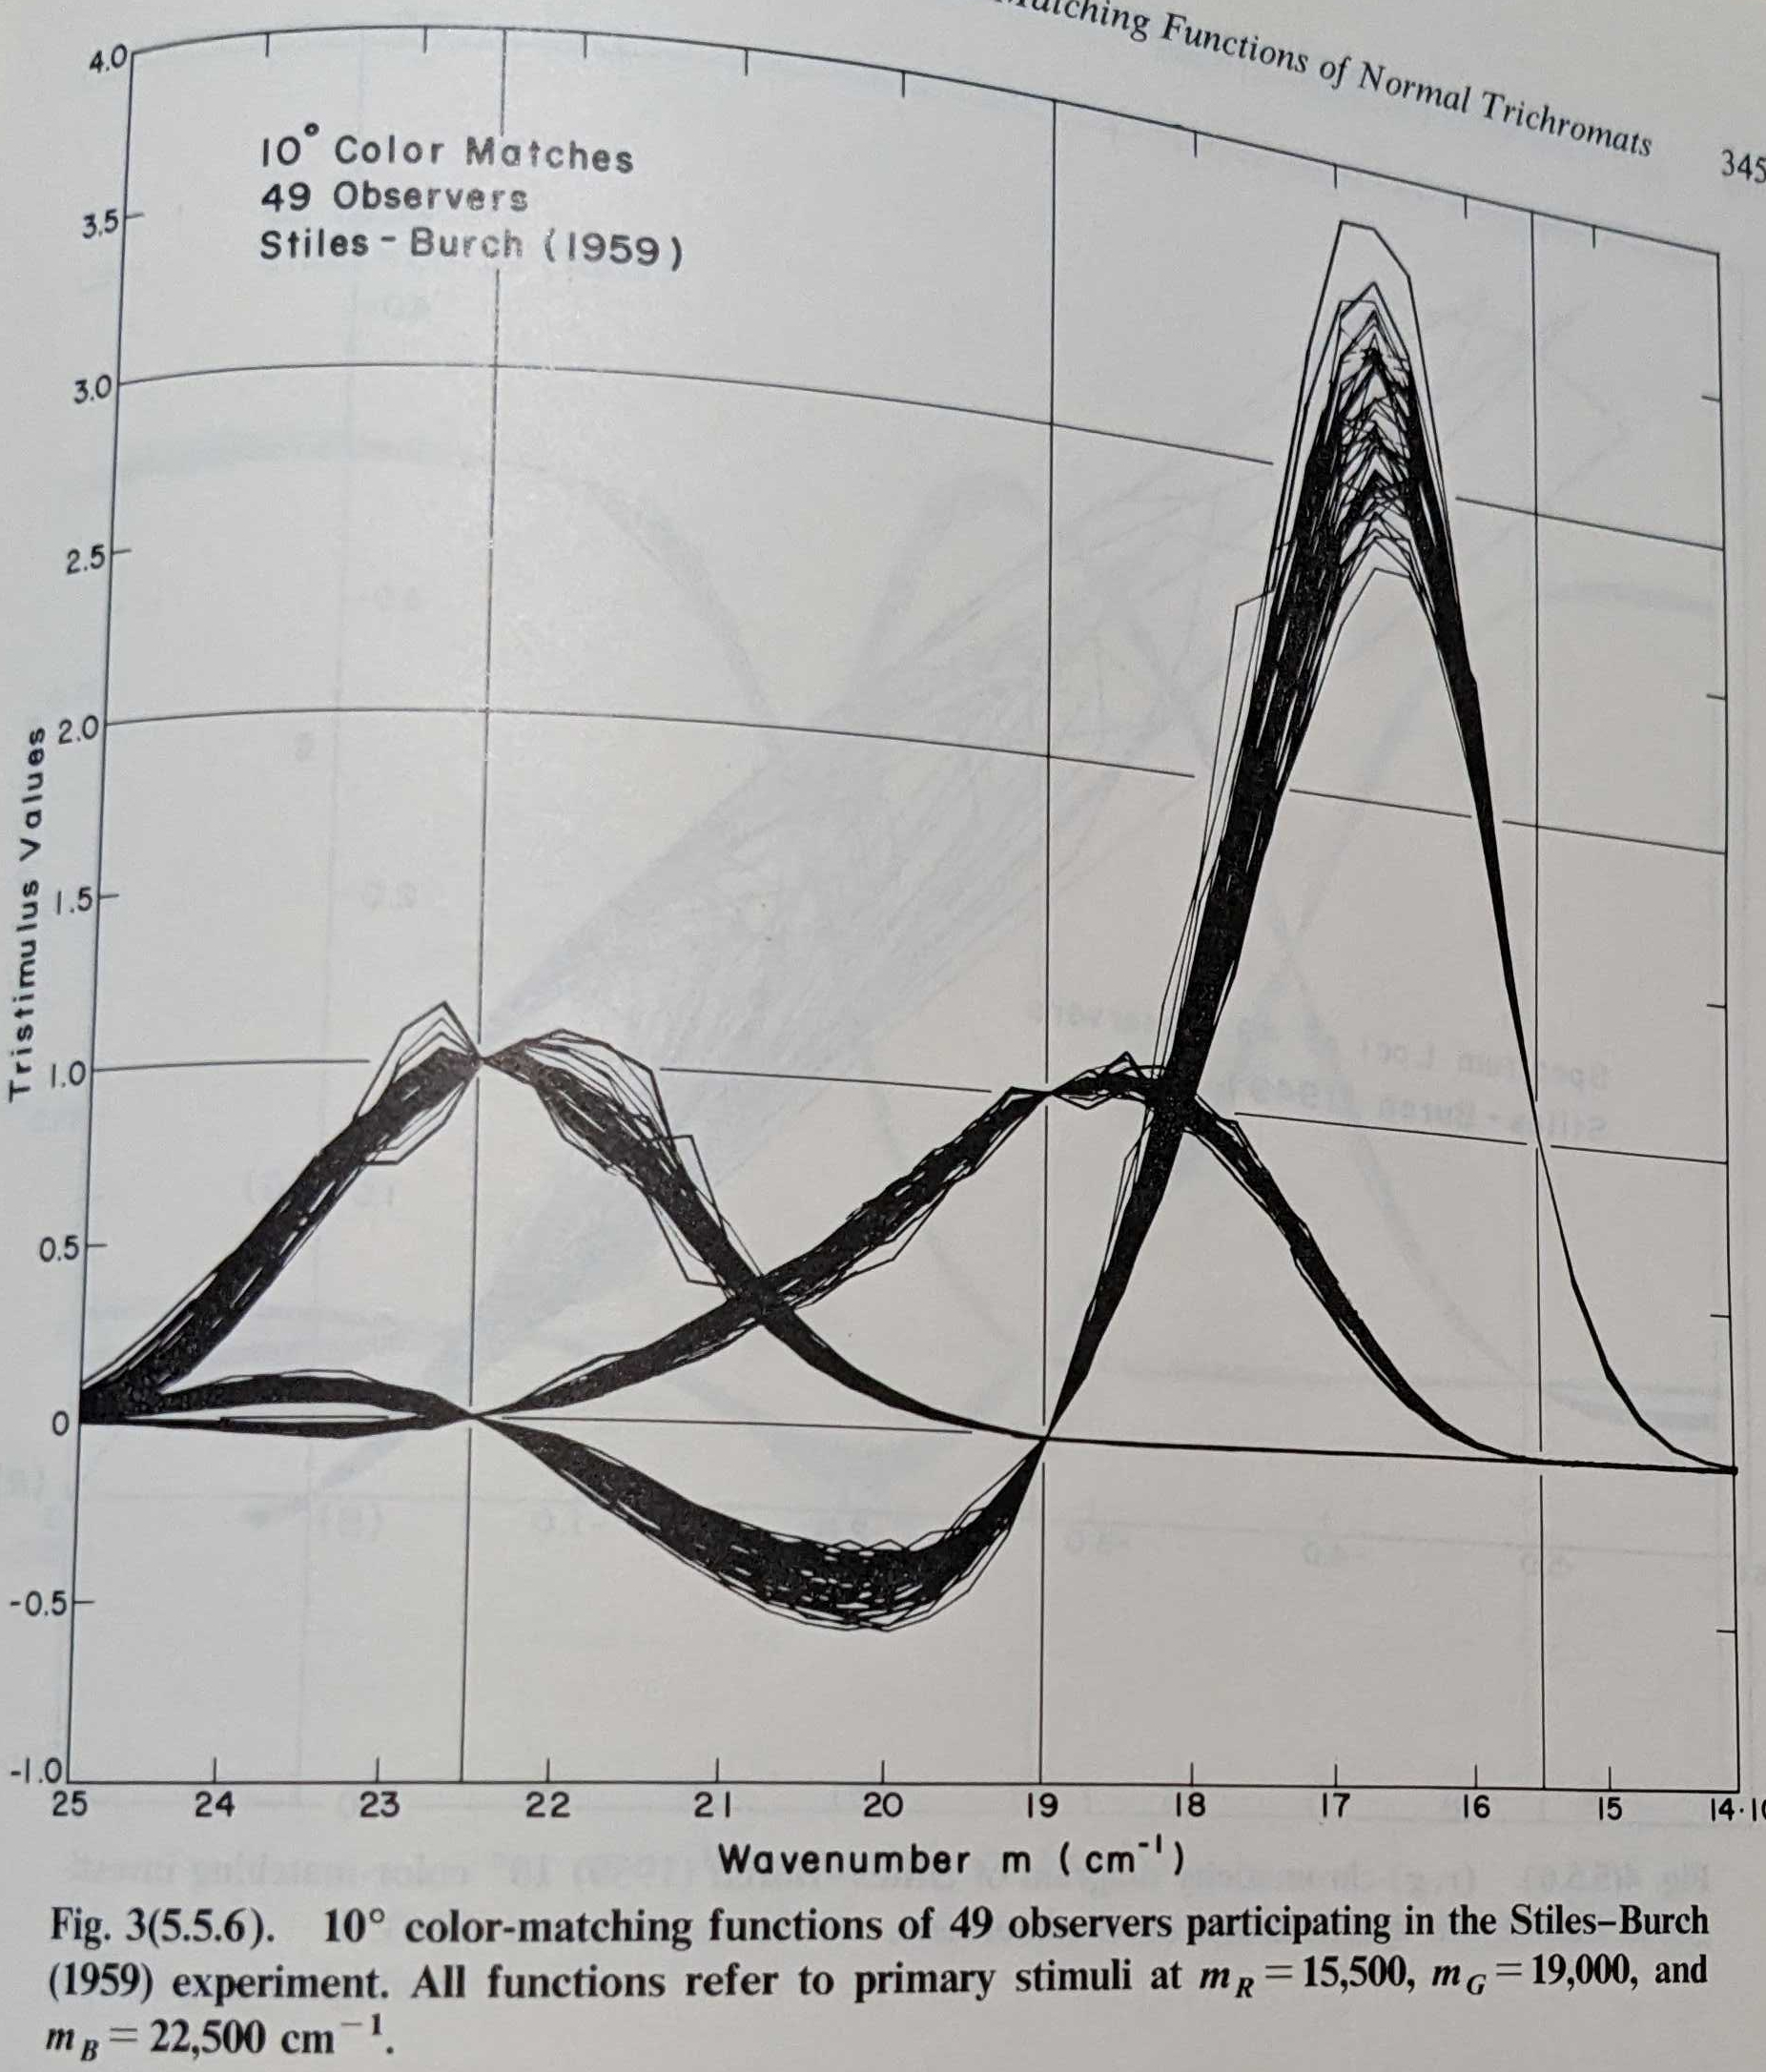 Trisimulus curves from the Stiles-Burch experiment in the 1950s, again with significant difference between individuals.